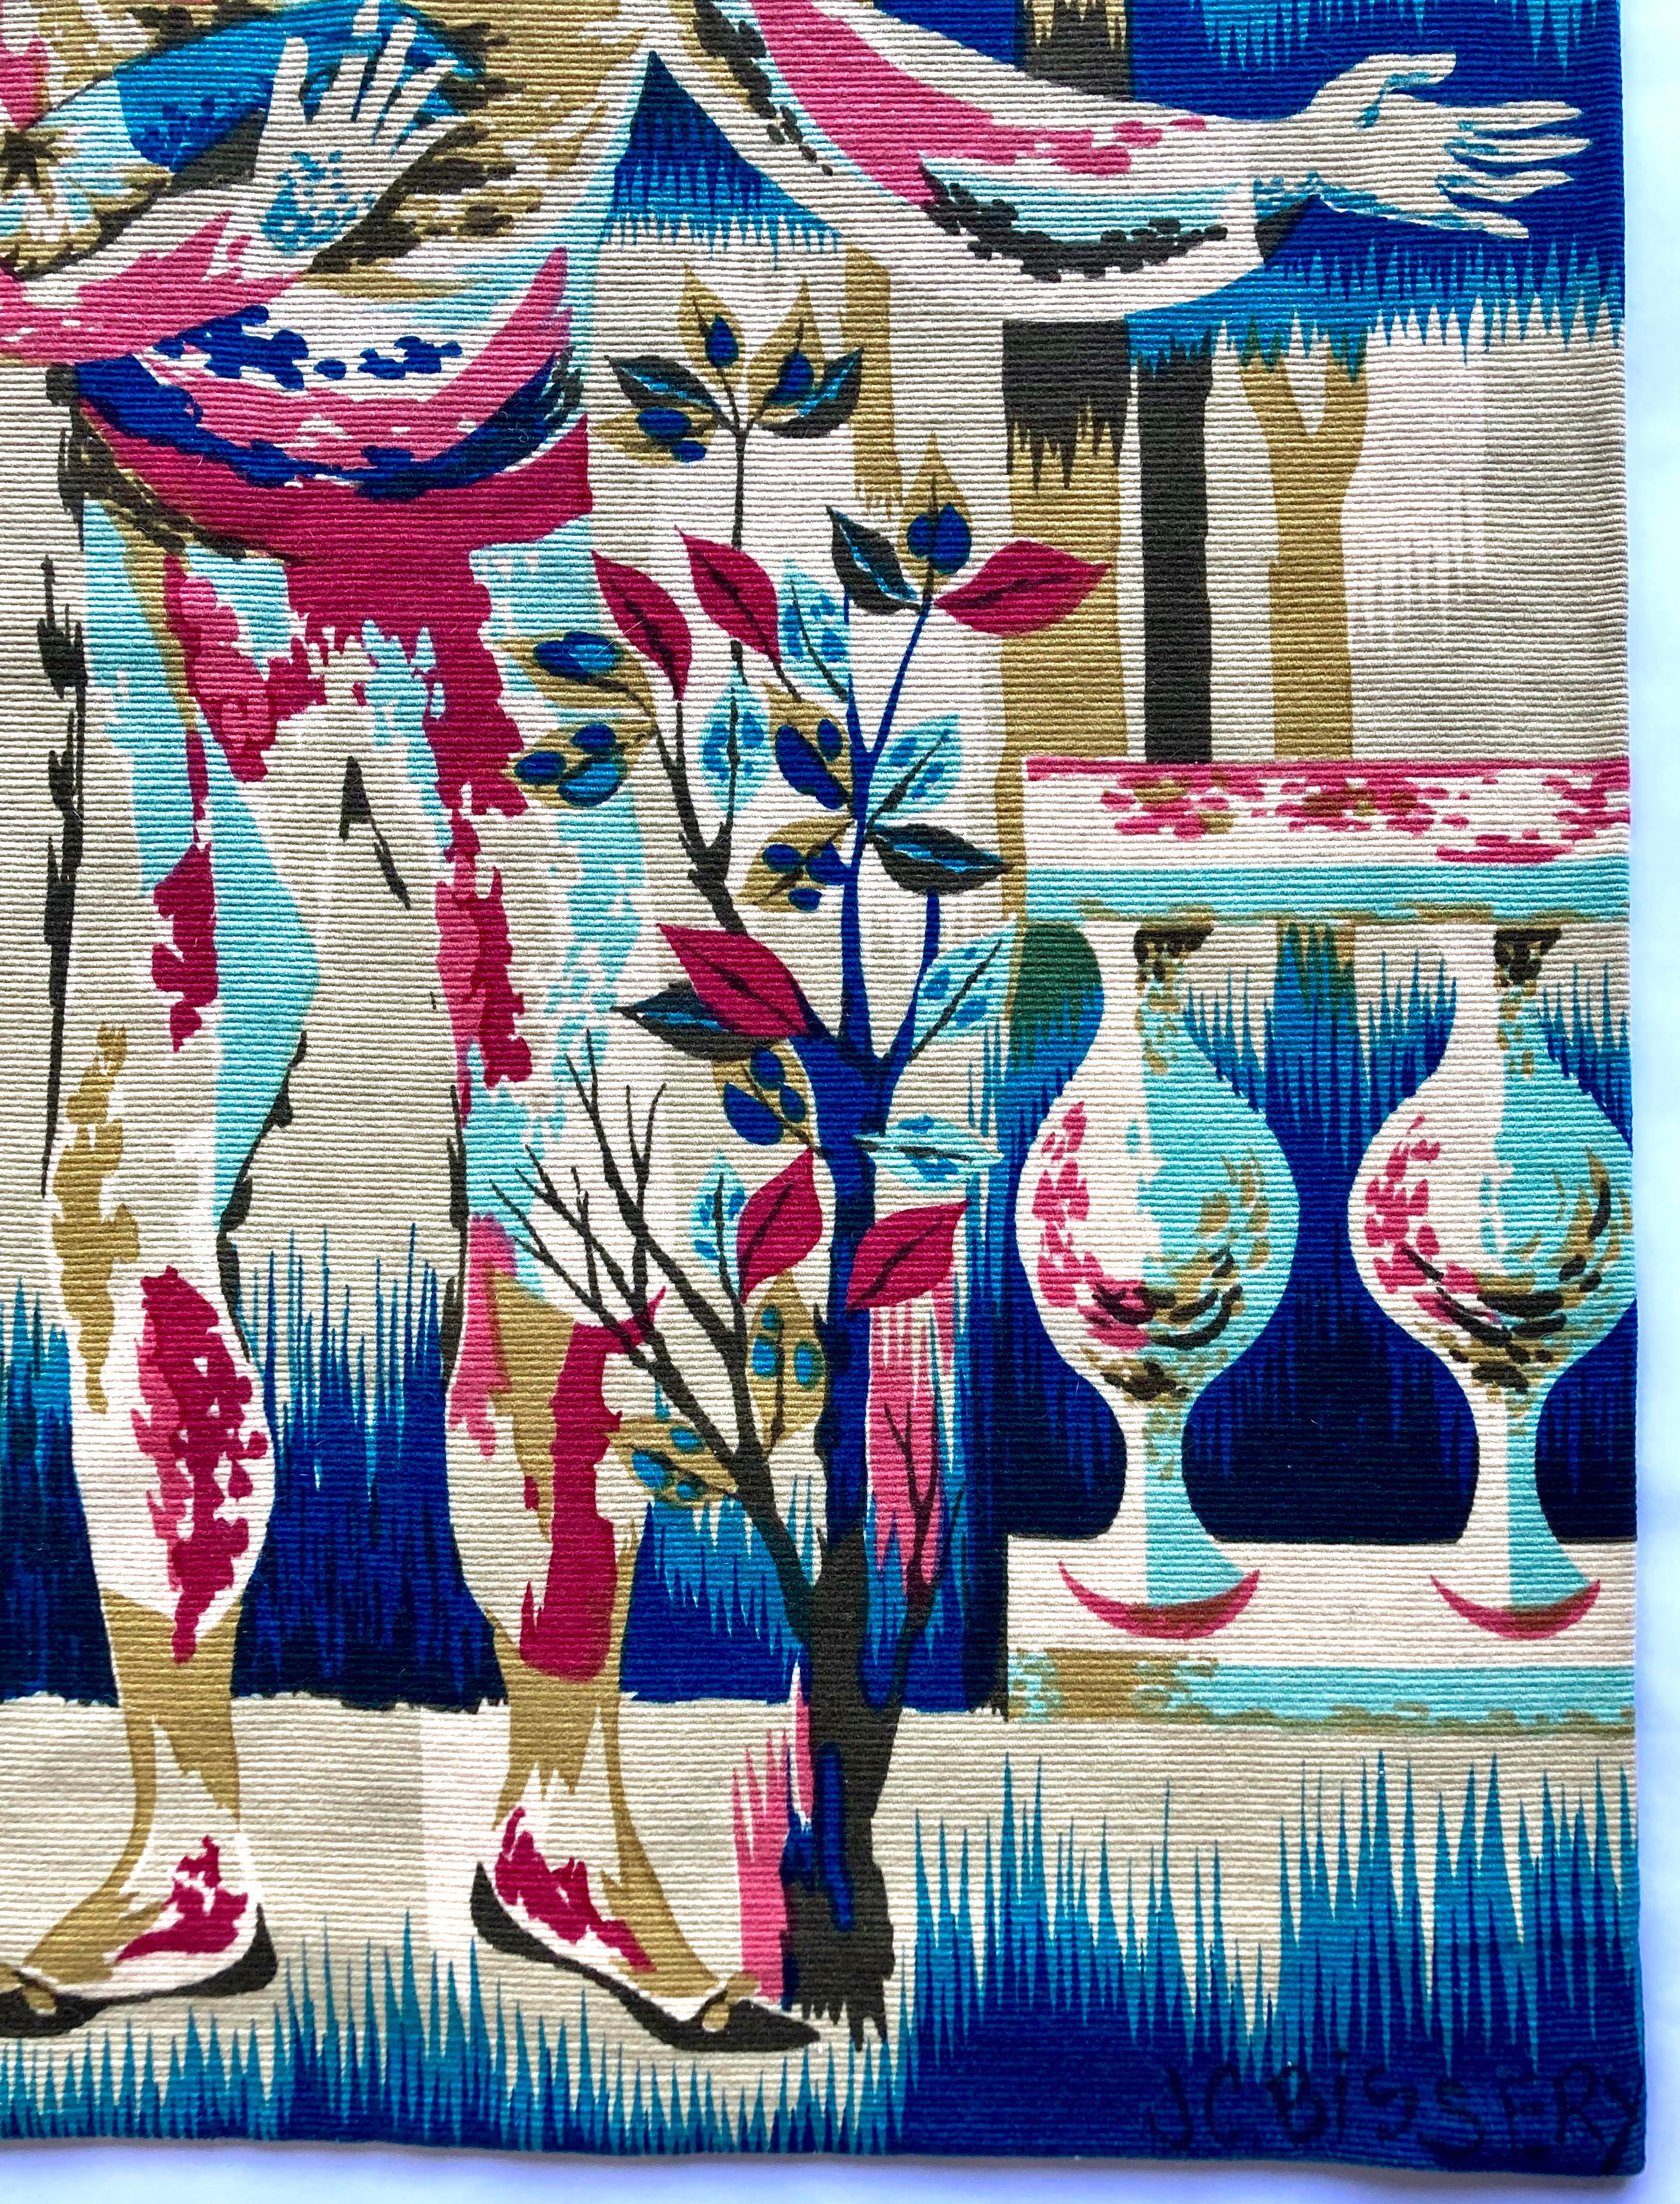 Vintage 1960s Hand-Printed French Wall Tapestry in Wool Signed by J.C. Bissery  For Sale 5